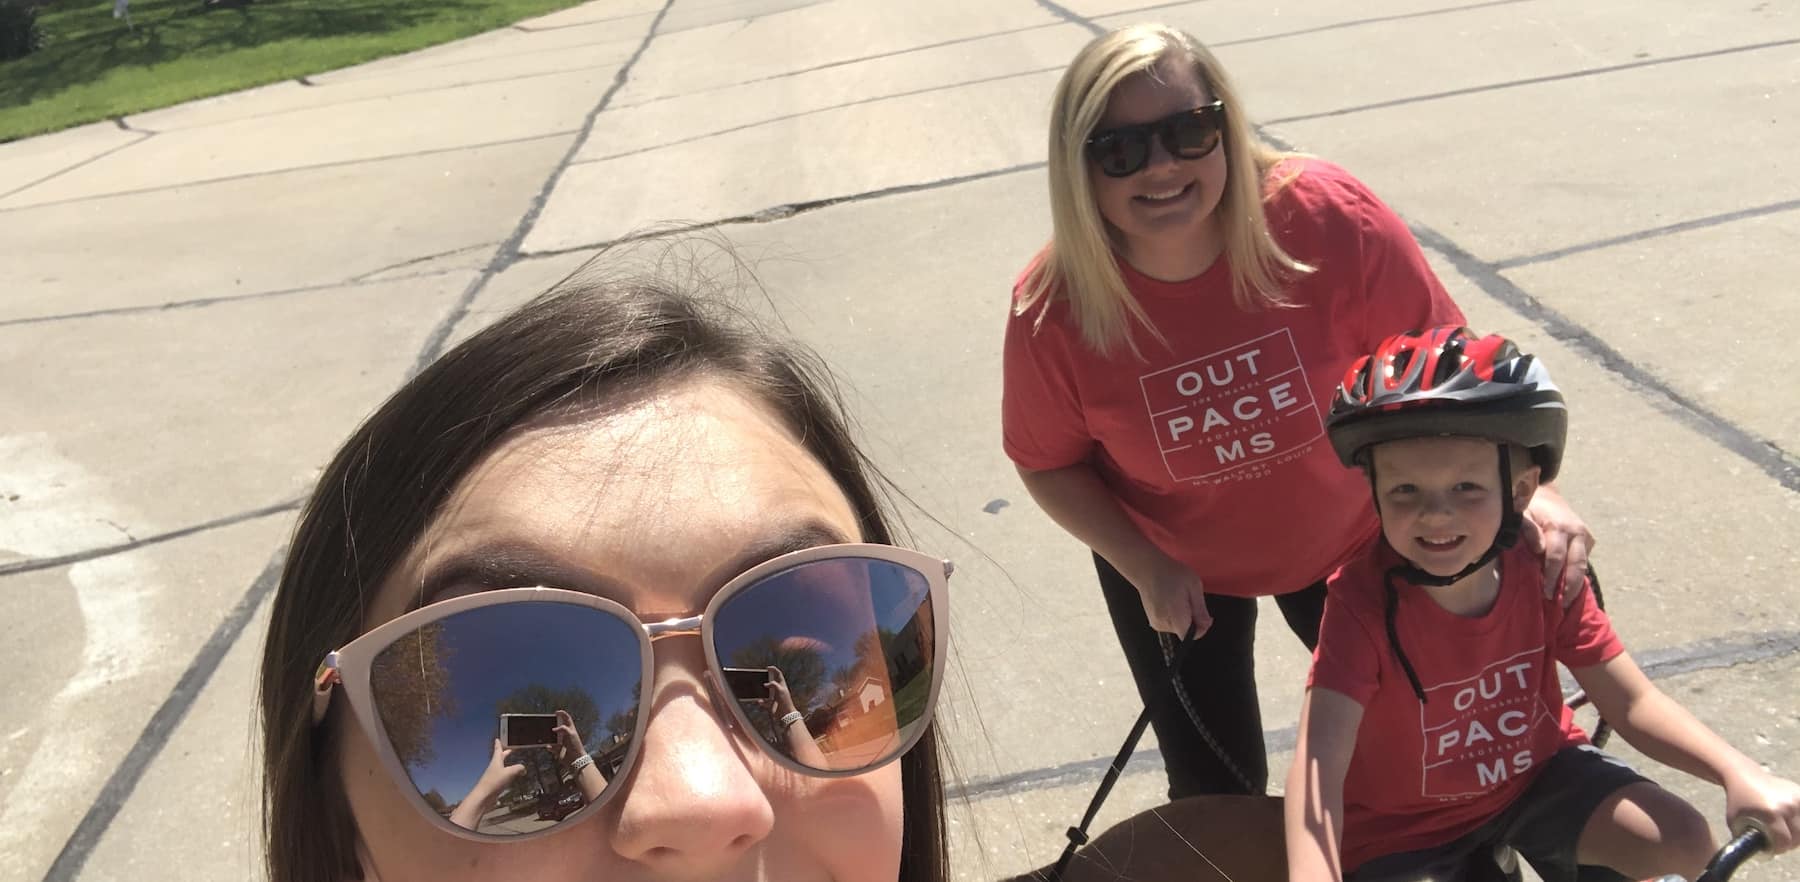 Family walking in neighborhood as virtual participants in Outpace MS 2020 fundraiser for the National Multiple Sclerosis Society